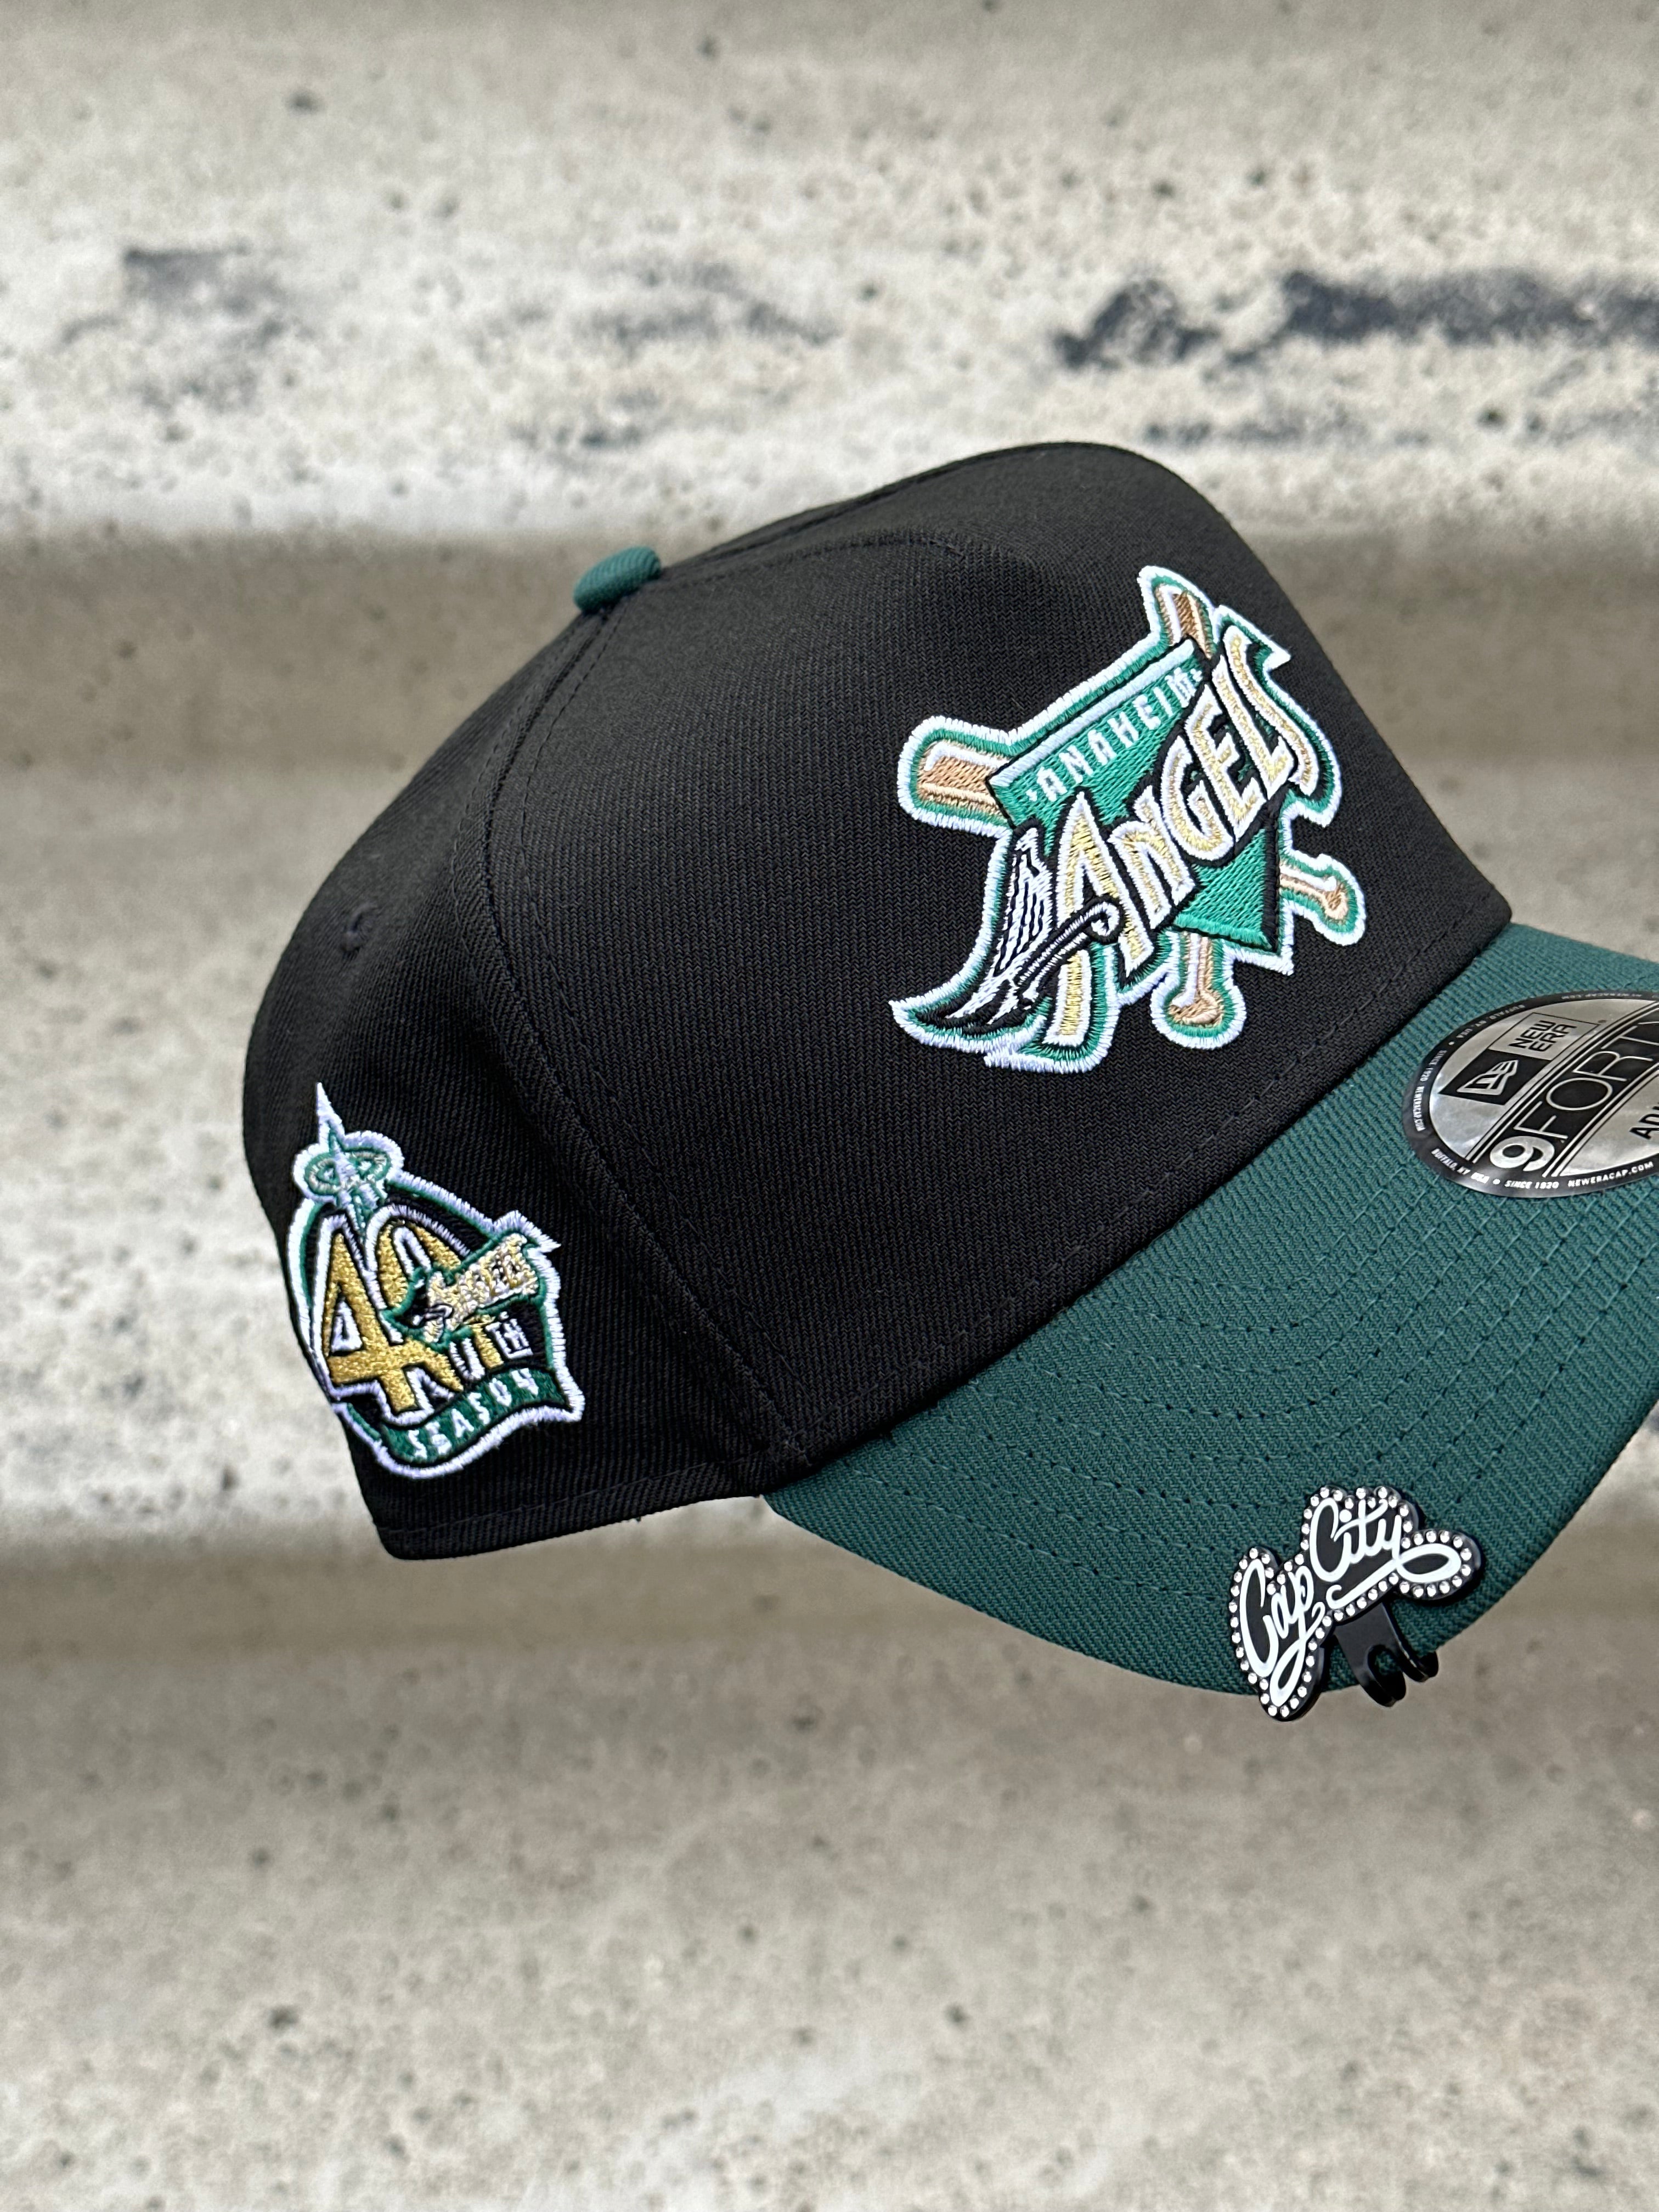 NEW ERA EXCLUSIVE 9FORTY A-FRAME BLACK/GREEN ANAHEIM ANGELS W/ 40TH ANNIVERSARY SIDE PATCH